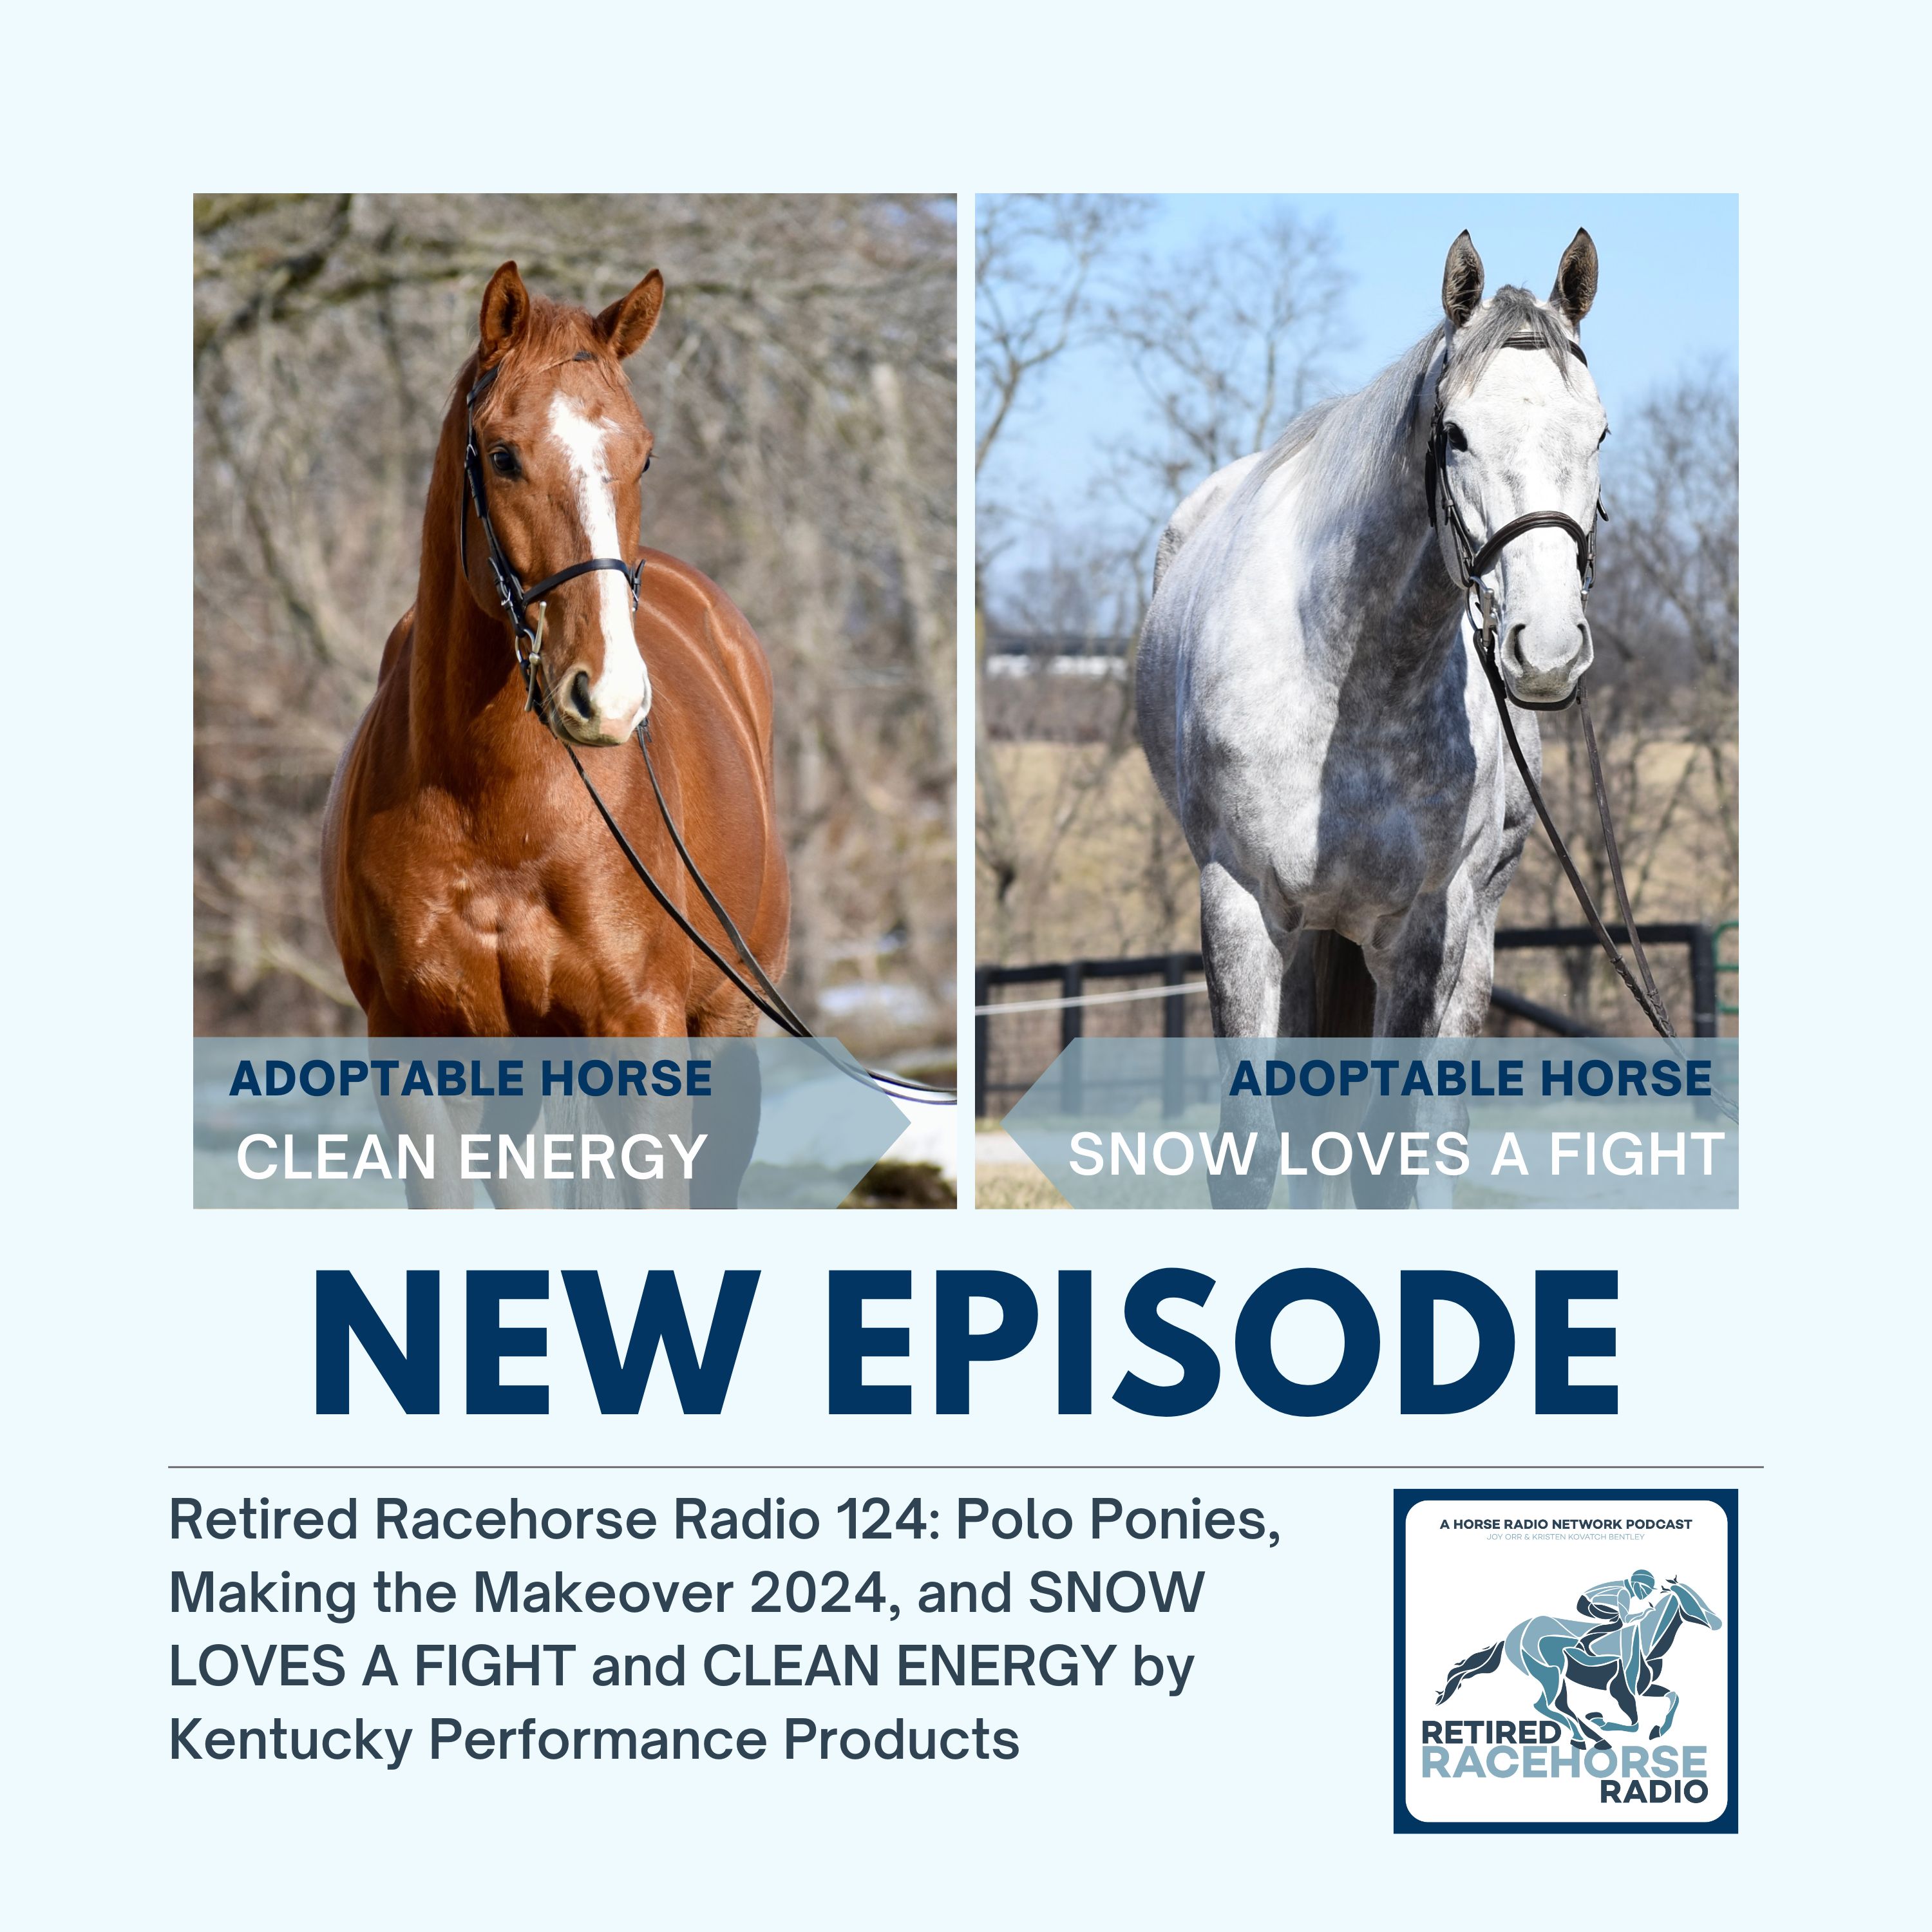 Polo Ponies, Making the Makeover 2024, and SNOW LOVES A FIGHT and CLEAN ENERGY by Kentucky Performance Products